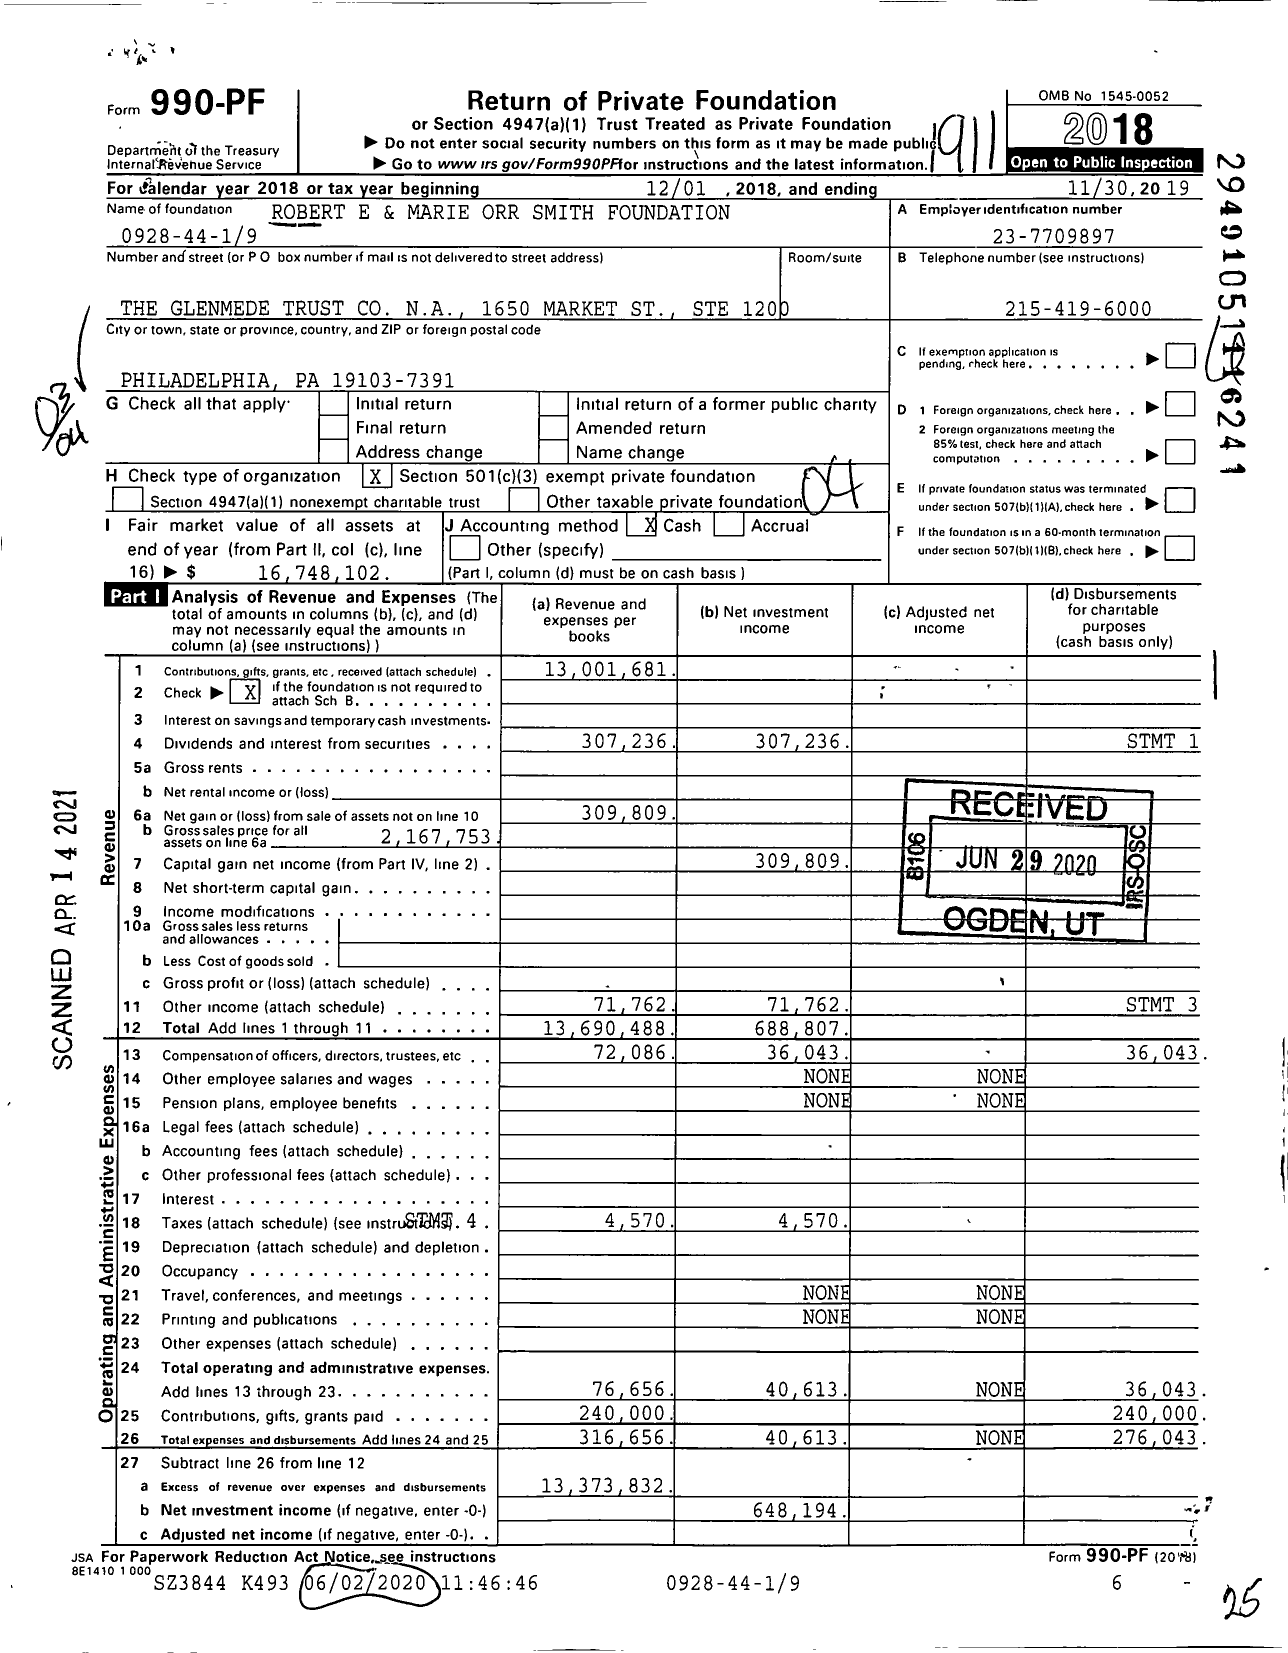 Image of first page of 2018 Form 990PF for Robert E and Marie Orr Smith Foundation